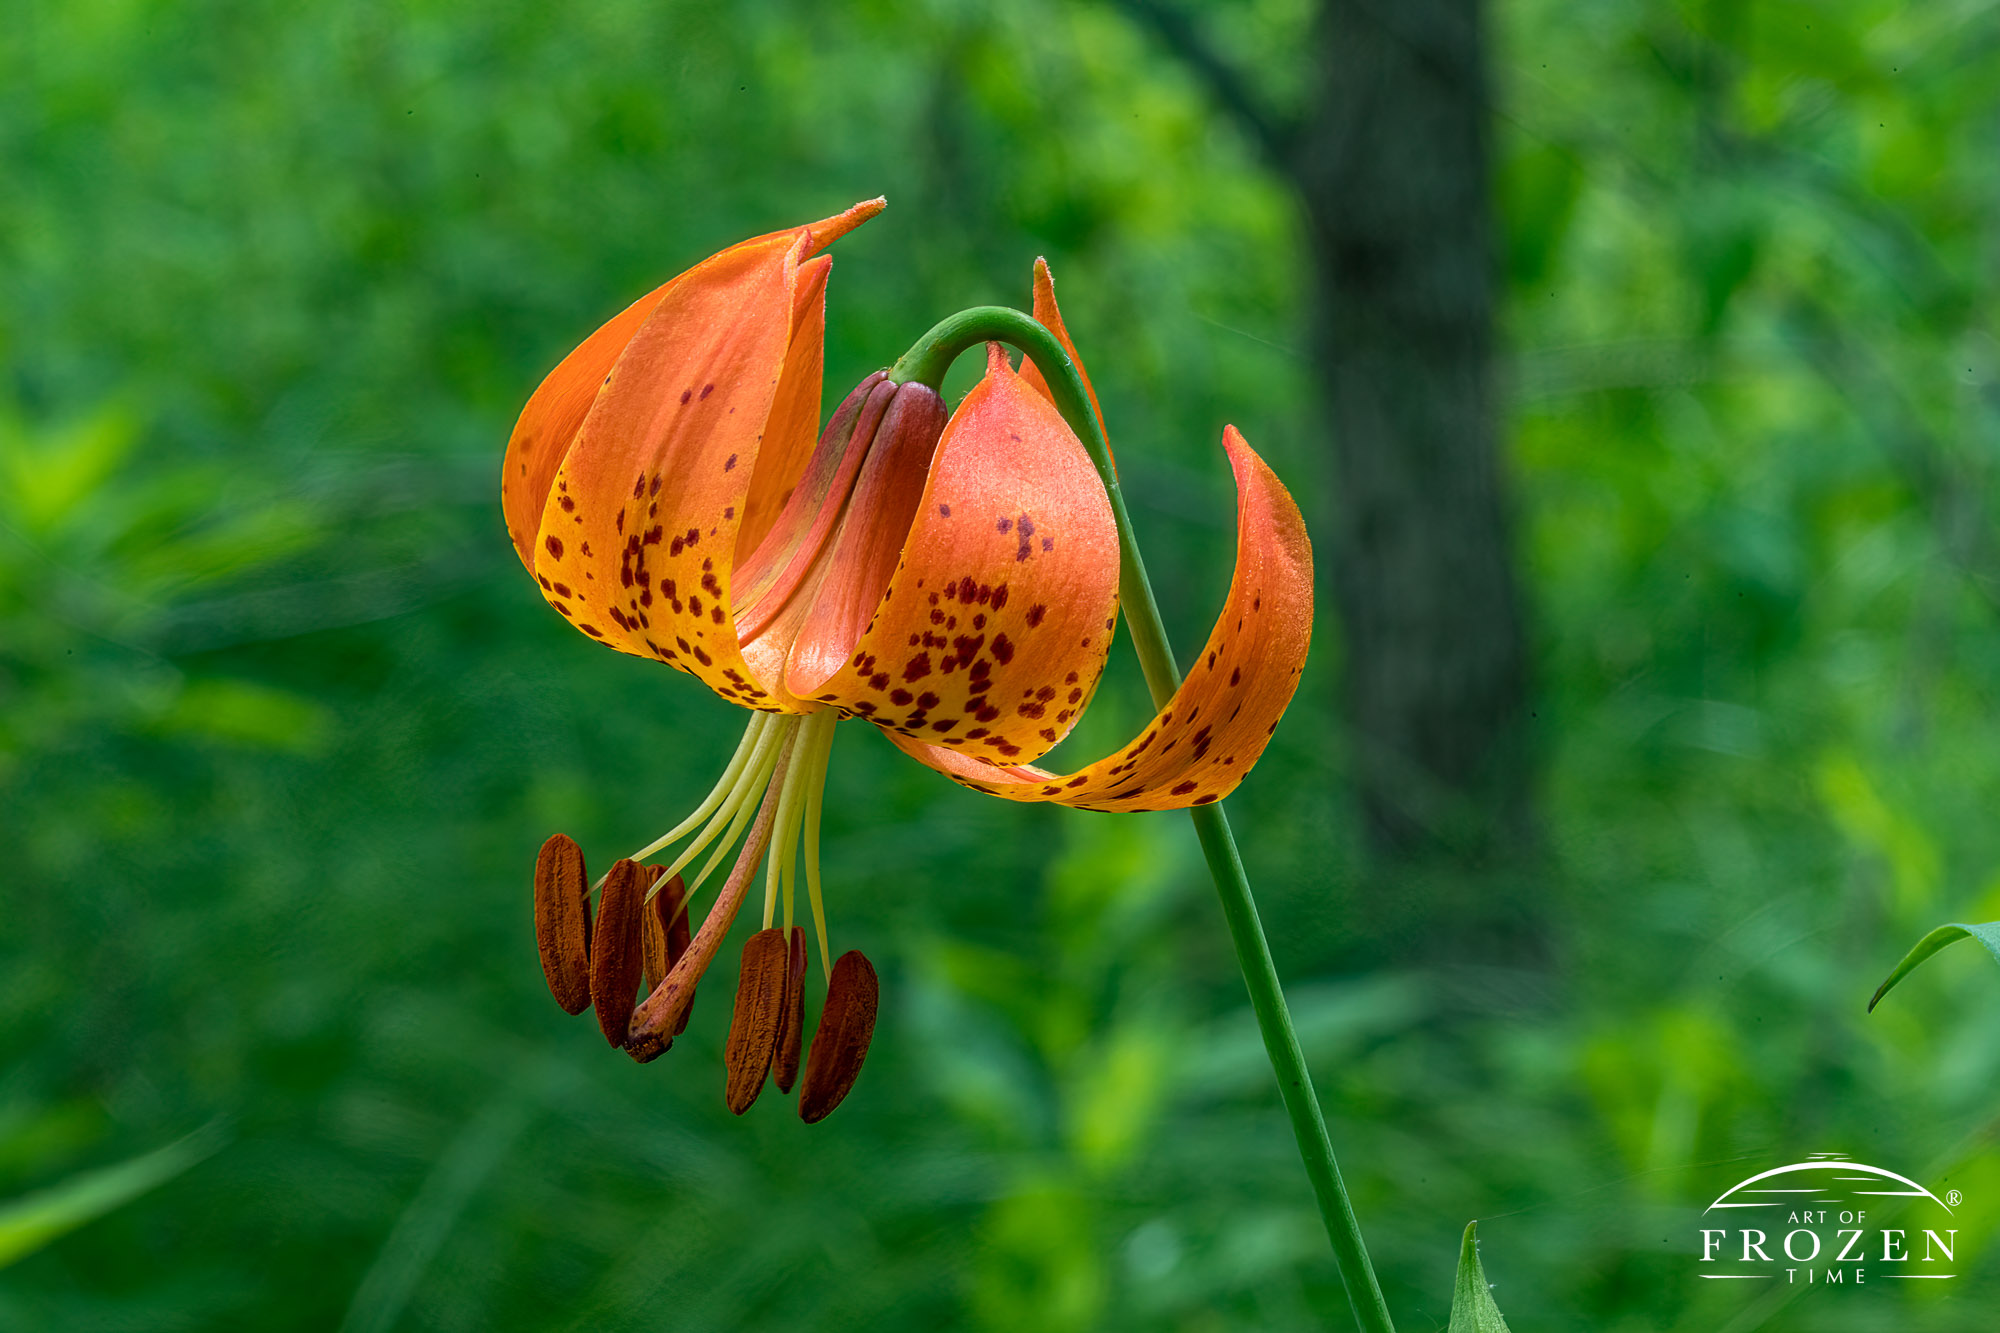 A close view of a Michigan Lily featuring orange petals with brown spots